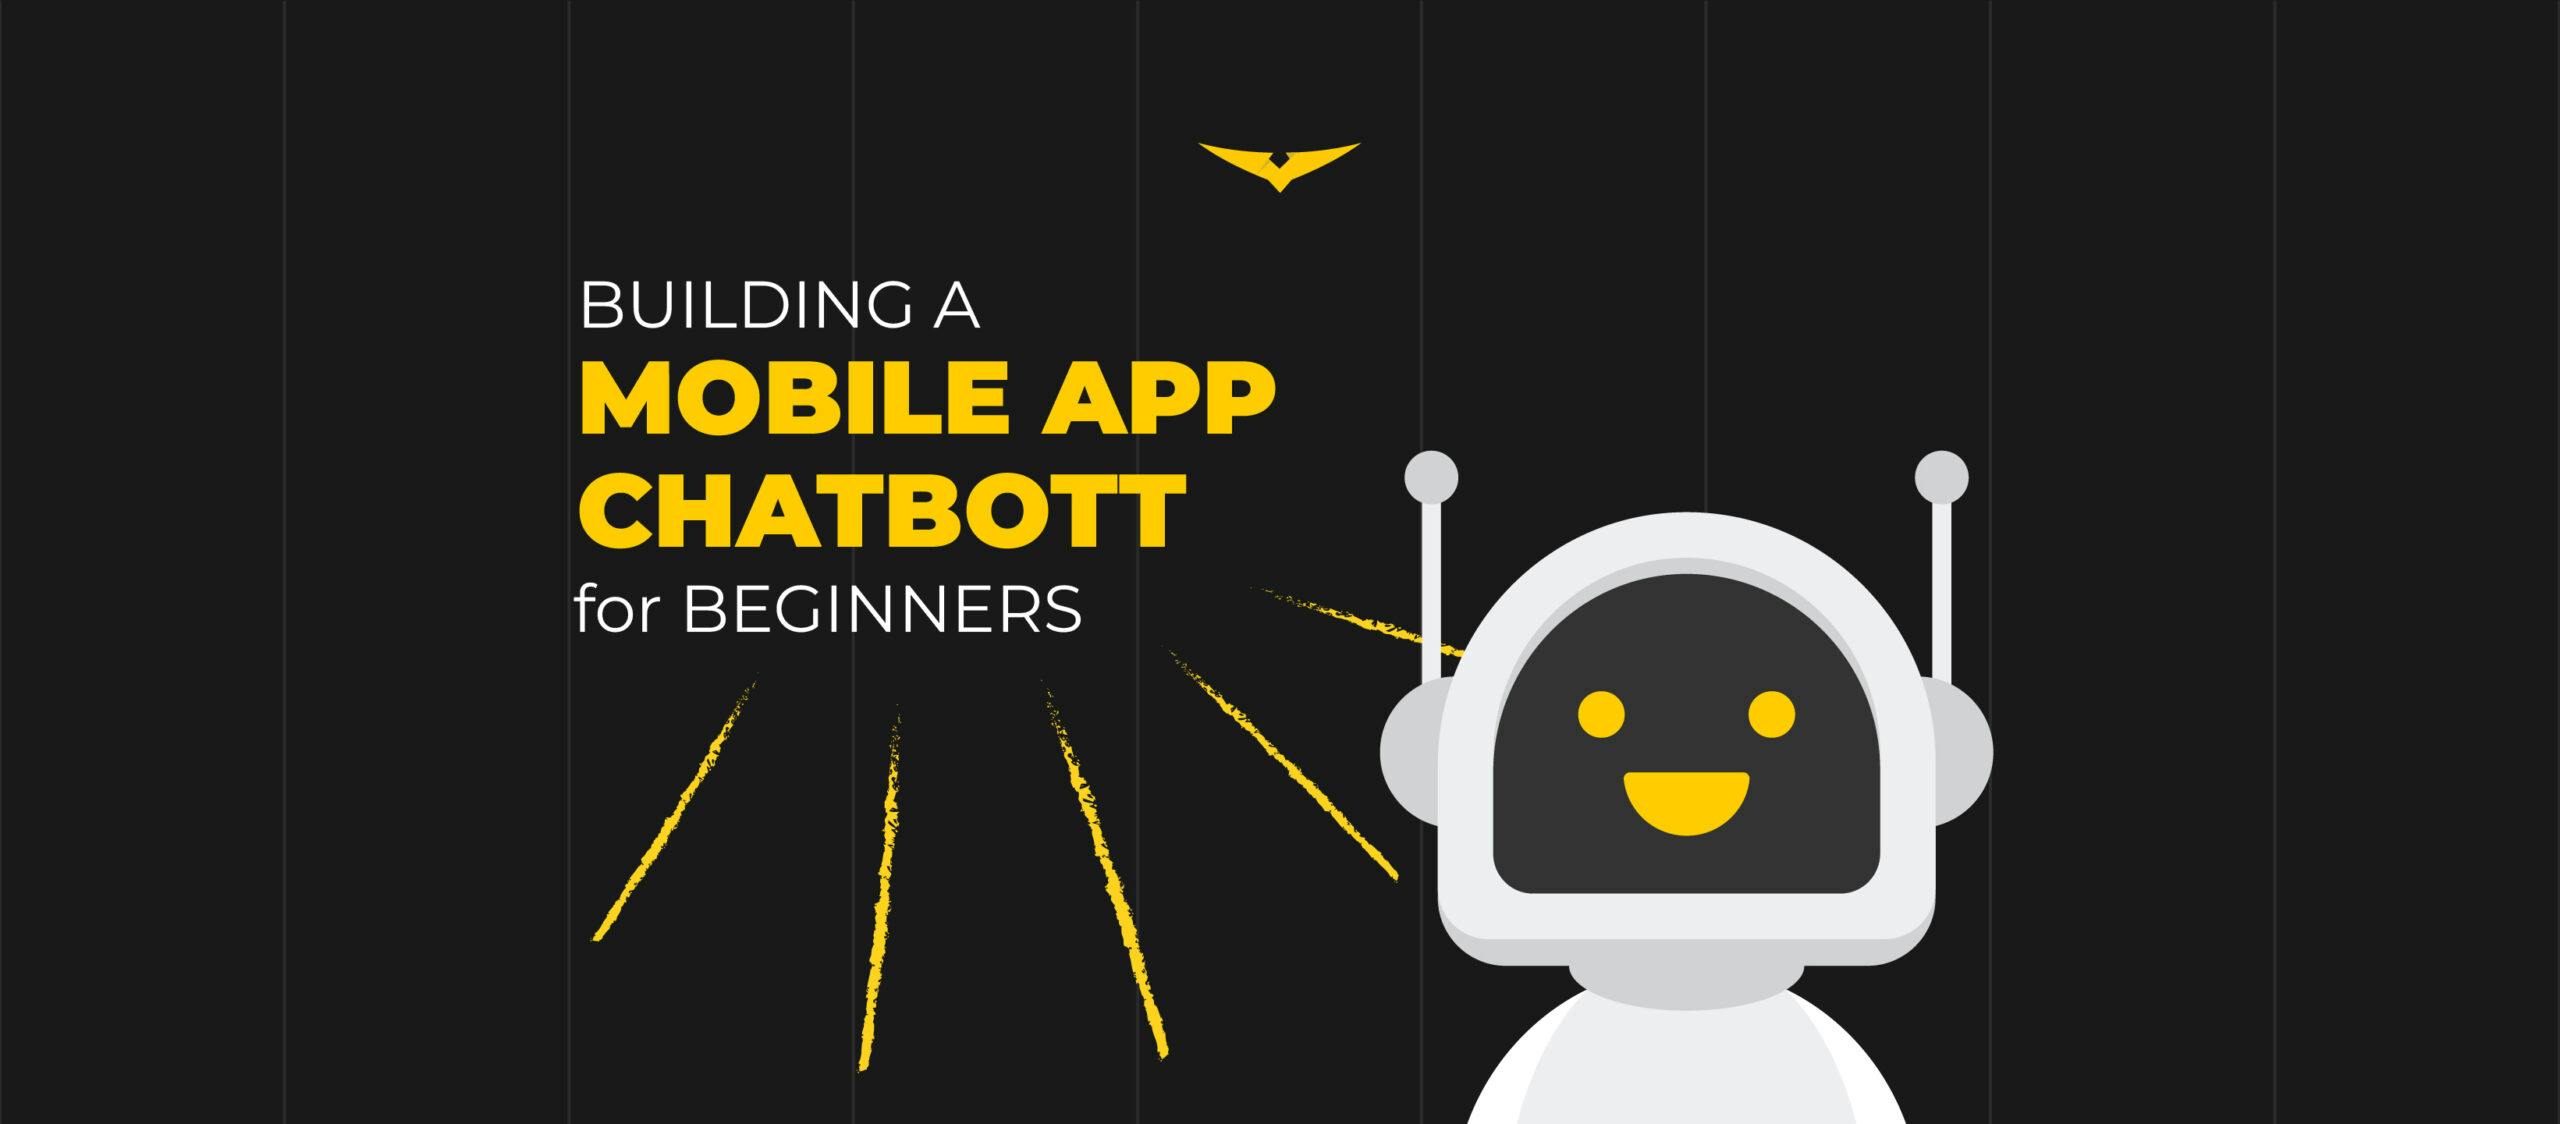 Building a Mobile App Chatbot for Beginners: Step by Step Guide 